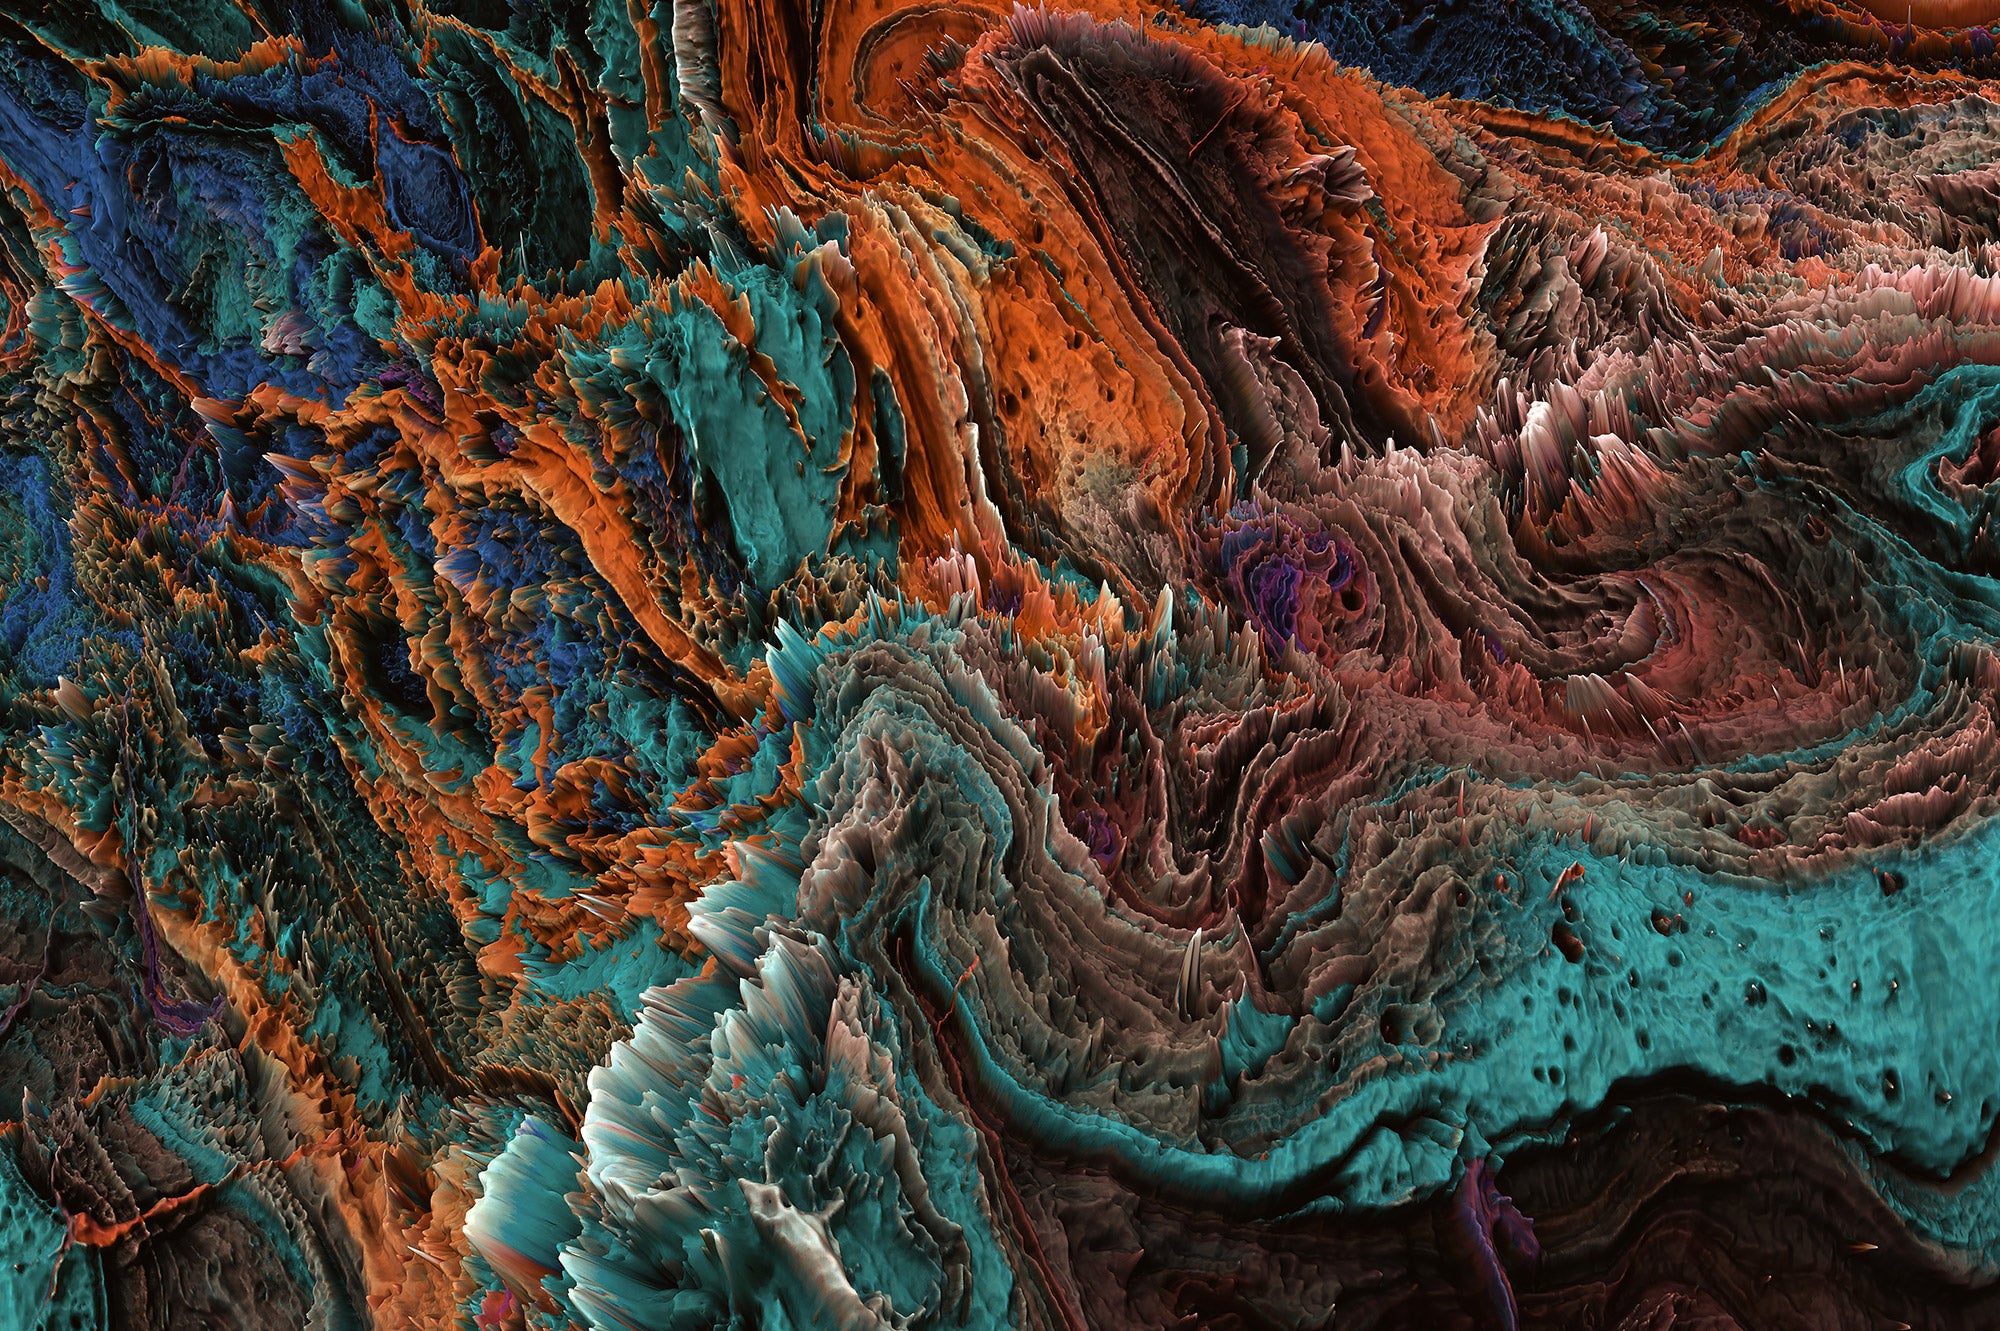 Terrain: Abstract 3D Landscapes